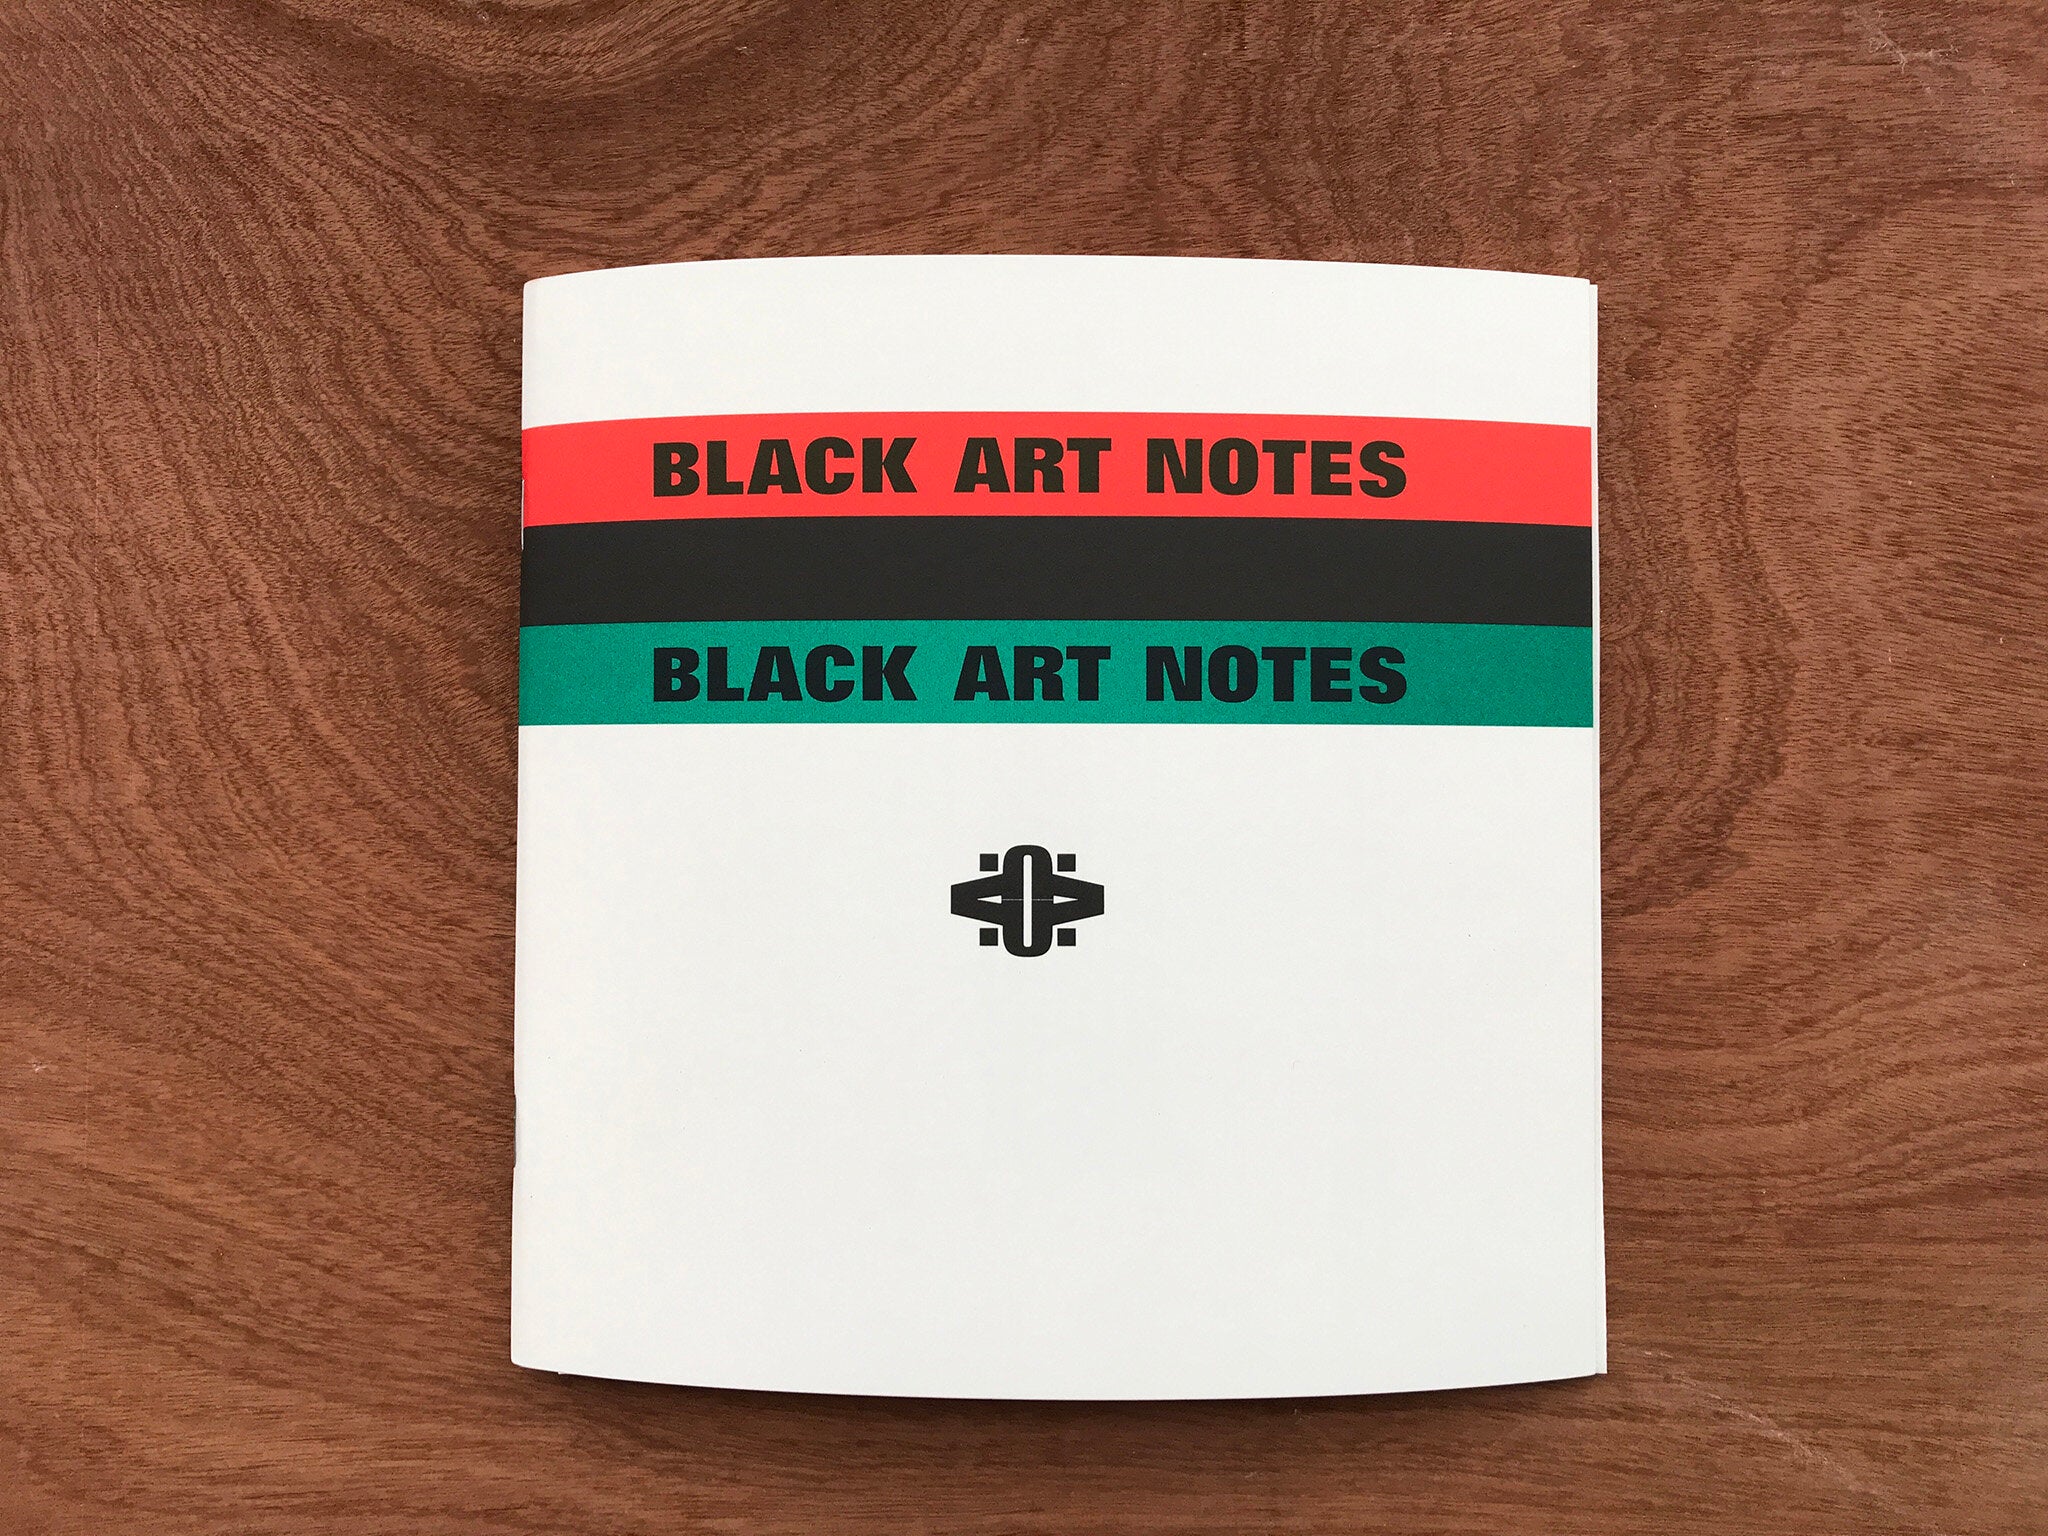 BLACK ART NOTES by Various Artists